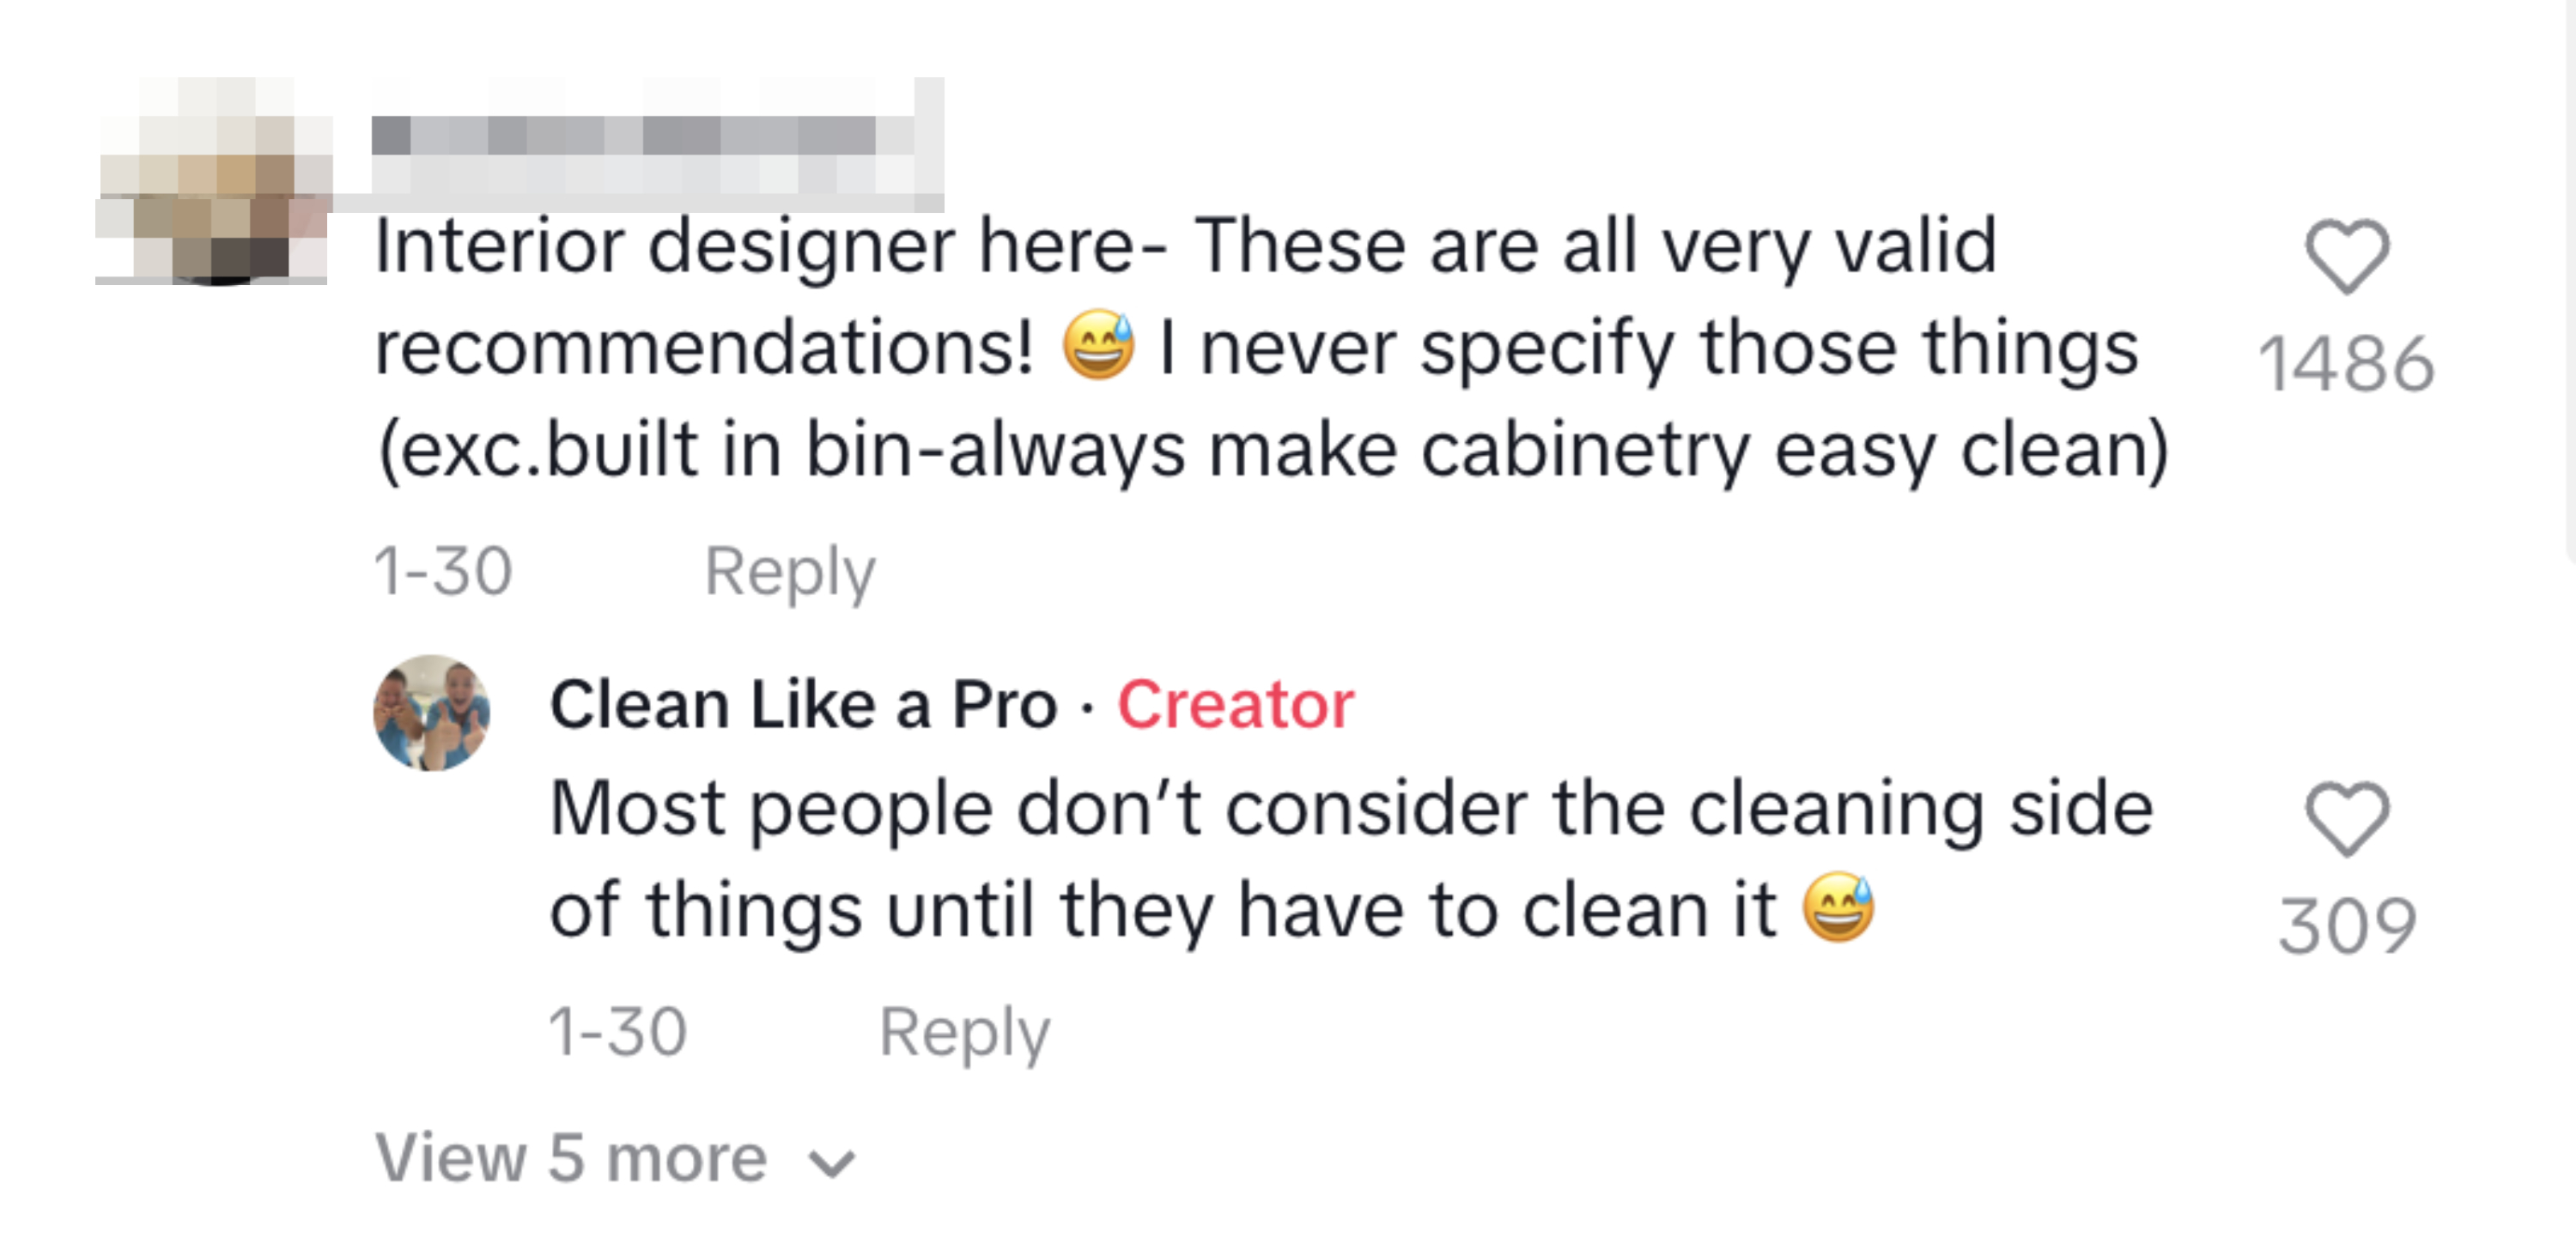 Two user comments on a social platform discussing interior design and cleaning considerations